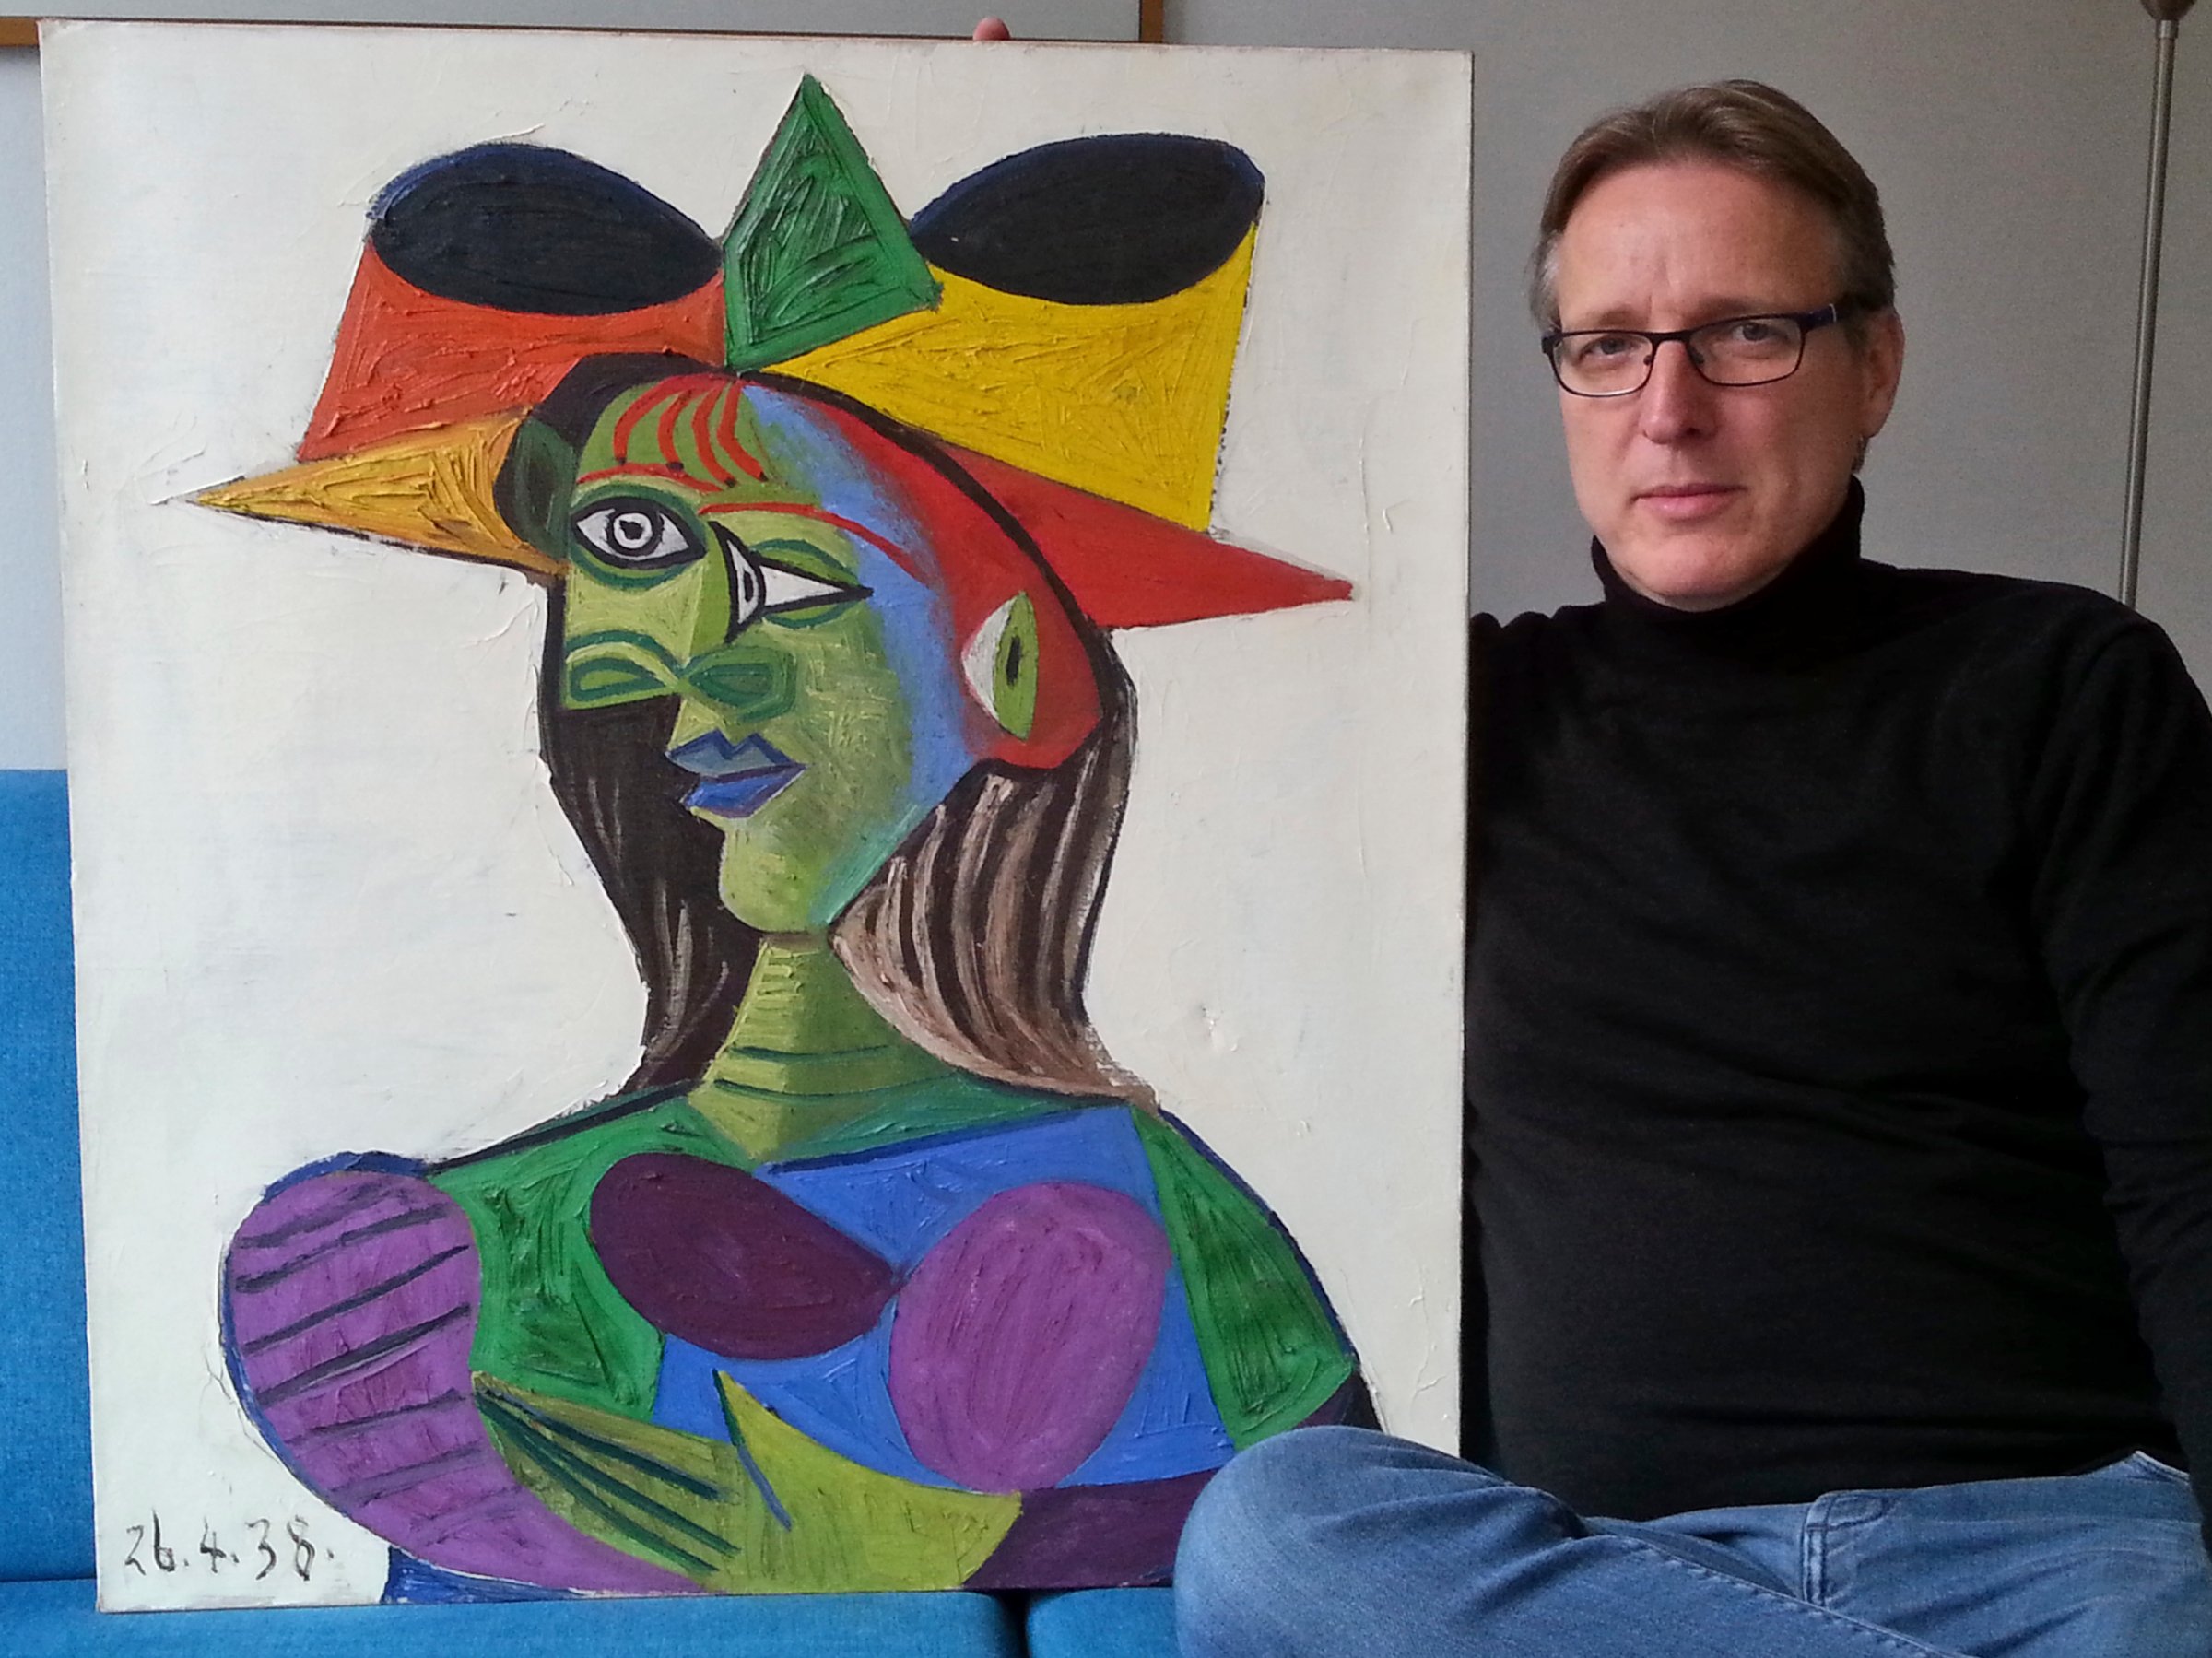 Dutch art detective Arthur Brand sits with "Buste de Femme", a recovered Picasso painting